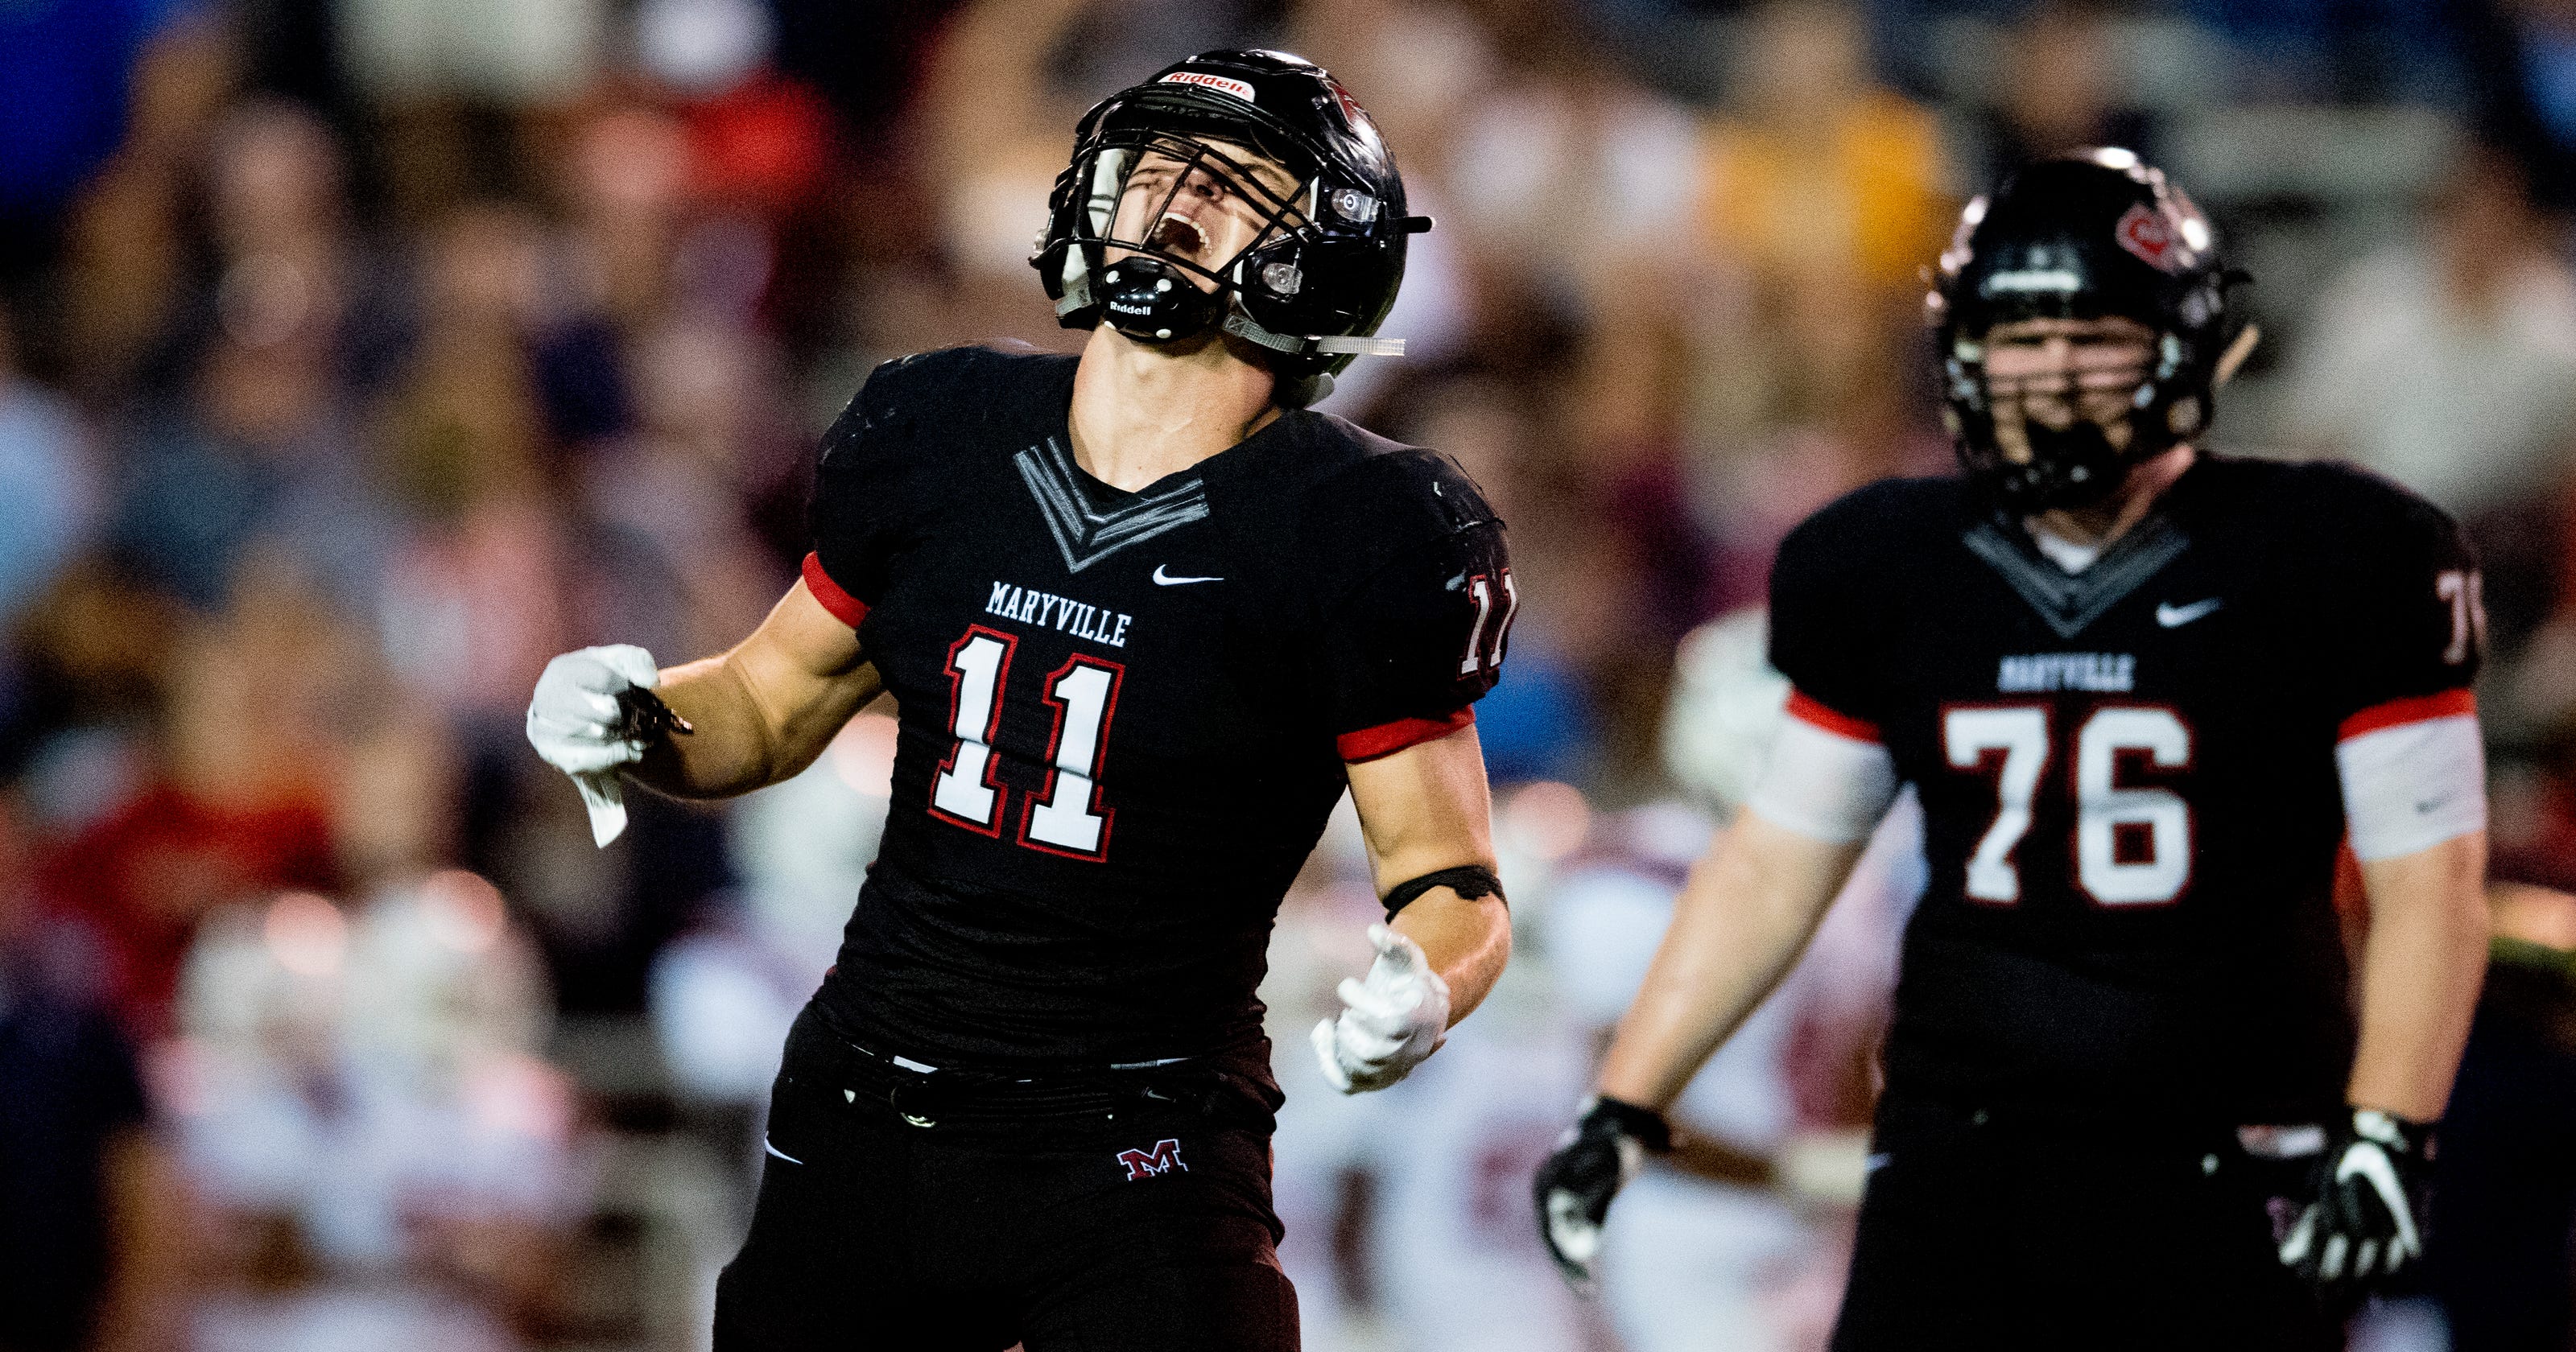 High school football Maryville remains No. 1 in Super 25 poll